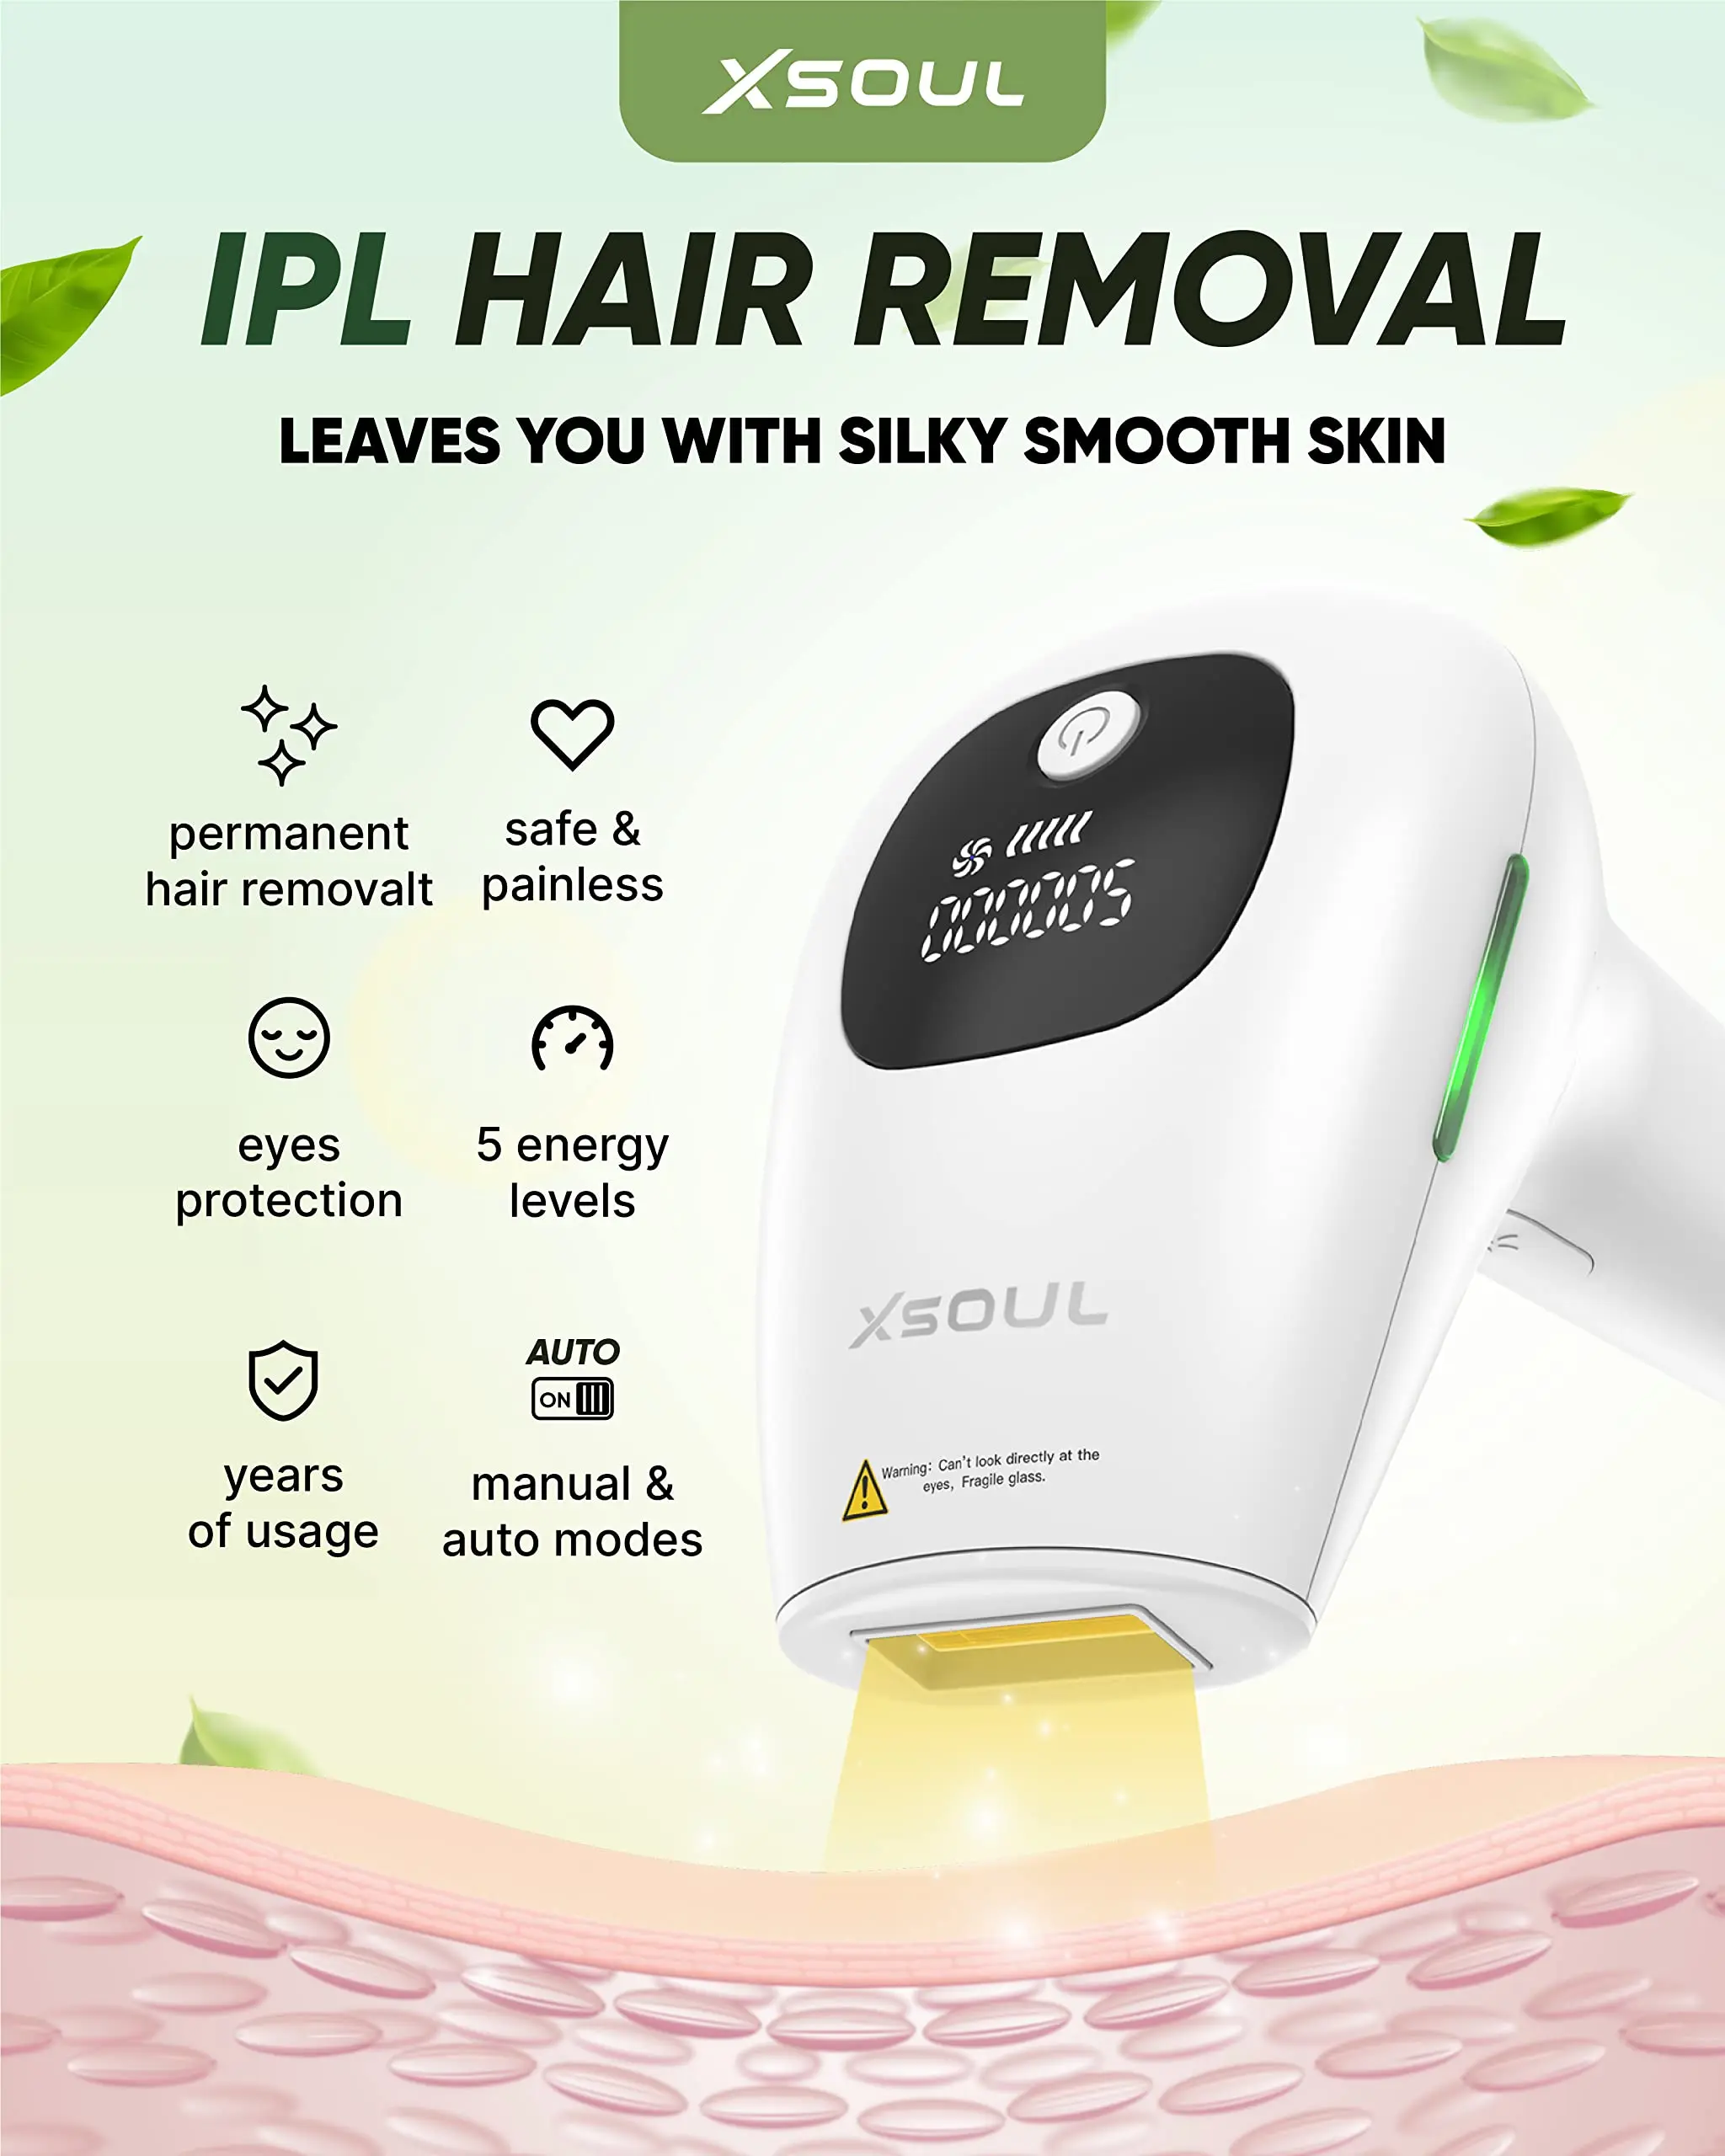 At-Home IPL Hair Removal for Women and Men Permanent Hair Removal 500,000 Flashes Painless Hair Remover on Armpits Back Legs Arm enlarge